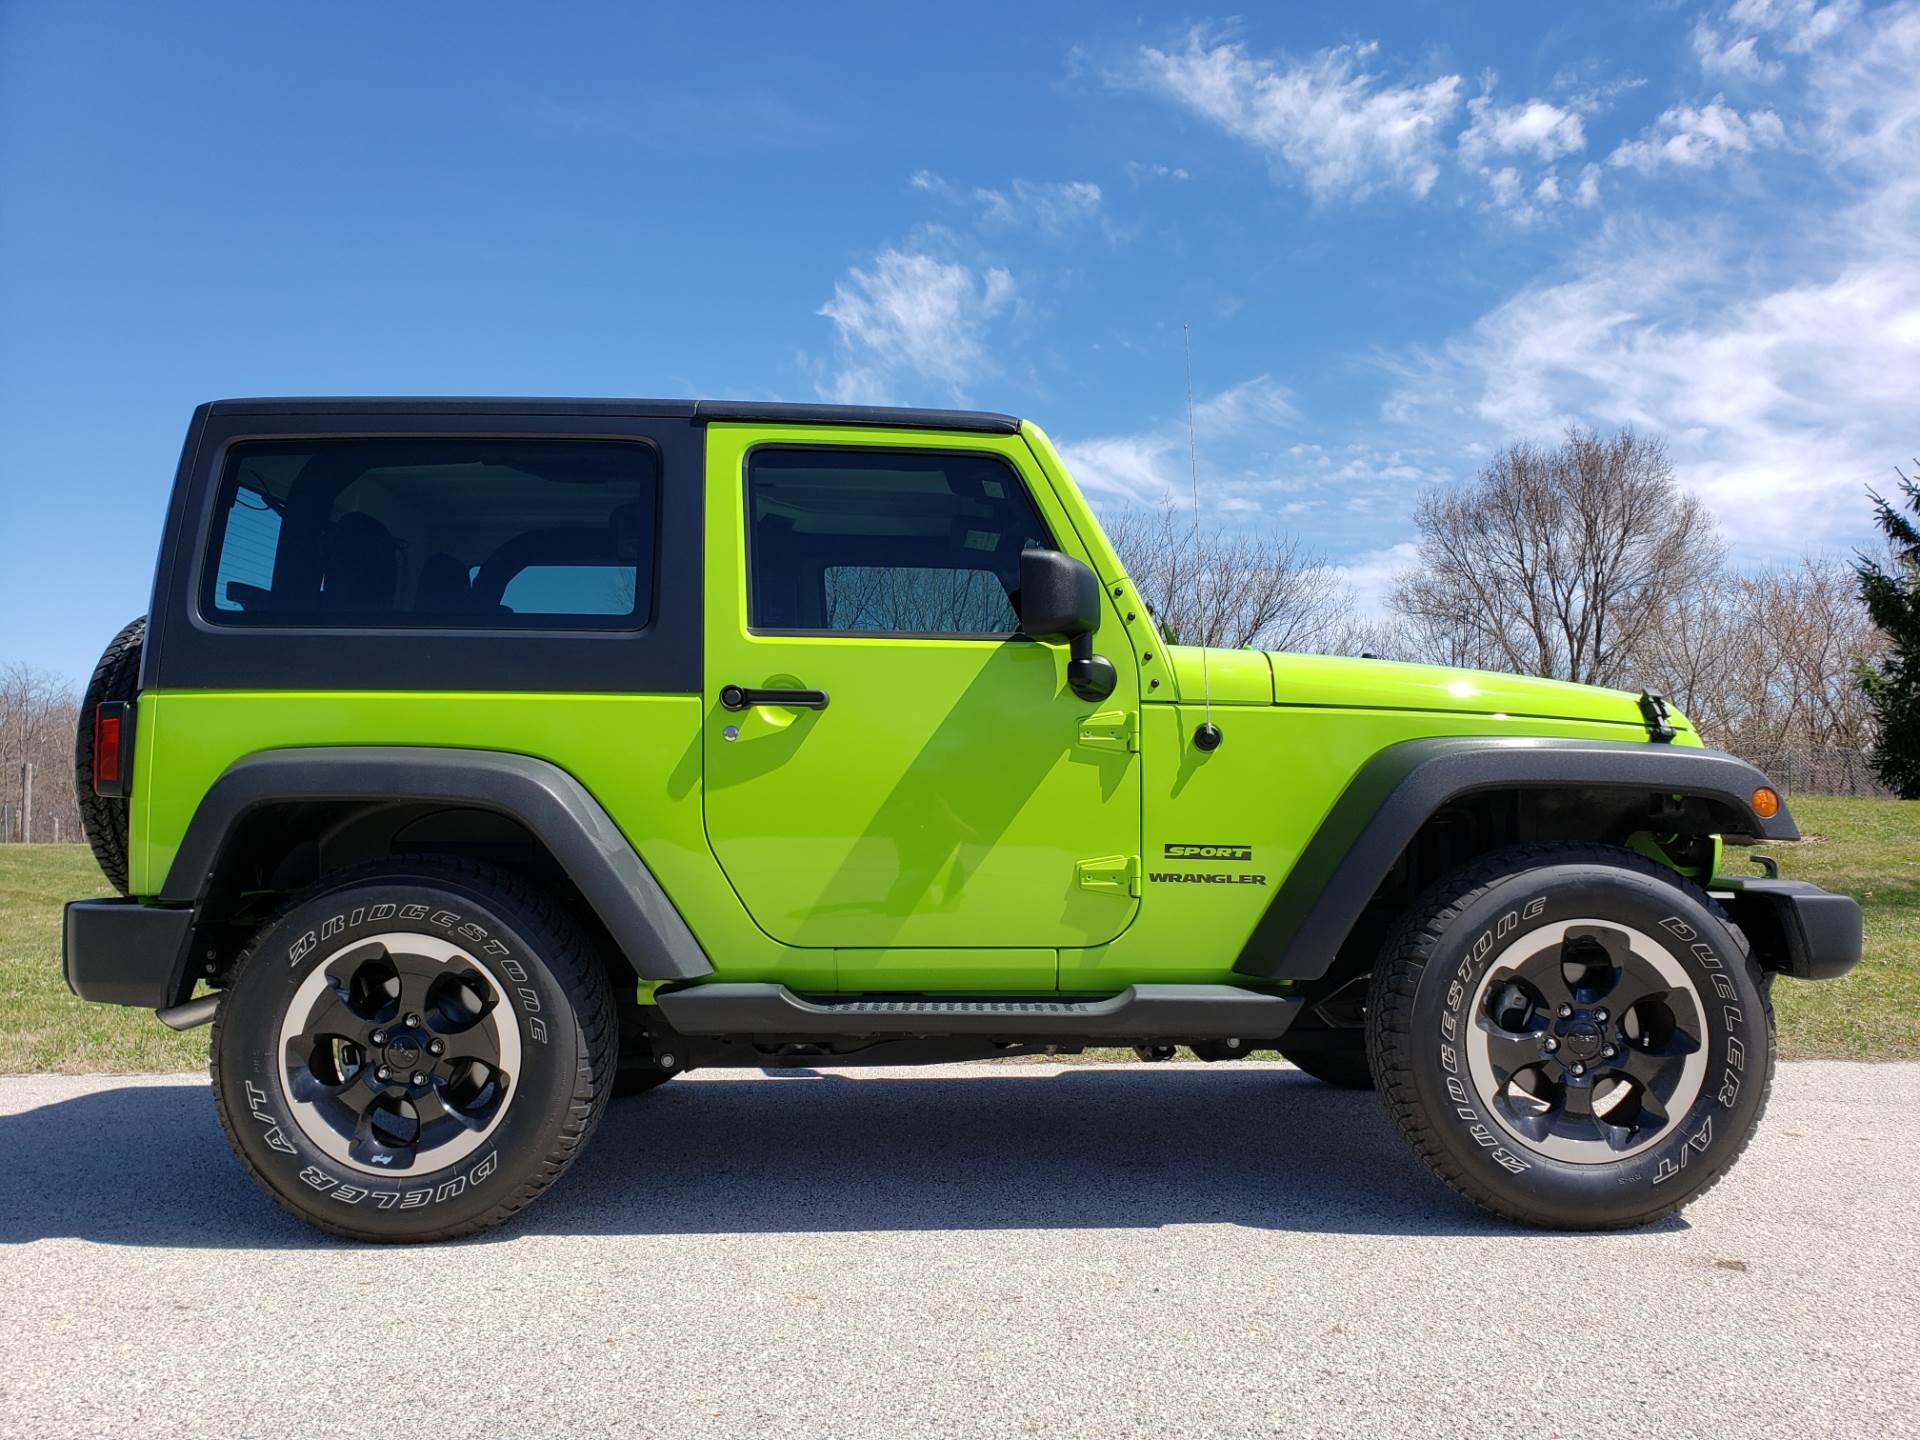 Used 2012 Jeep Wrangler | Automobile in Big Bend WI | 4010 Gecko Green  Pearlcoat